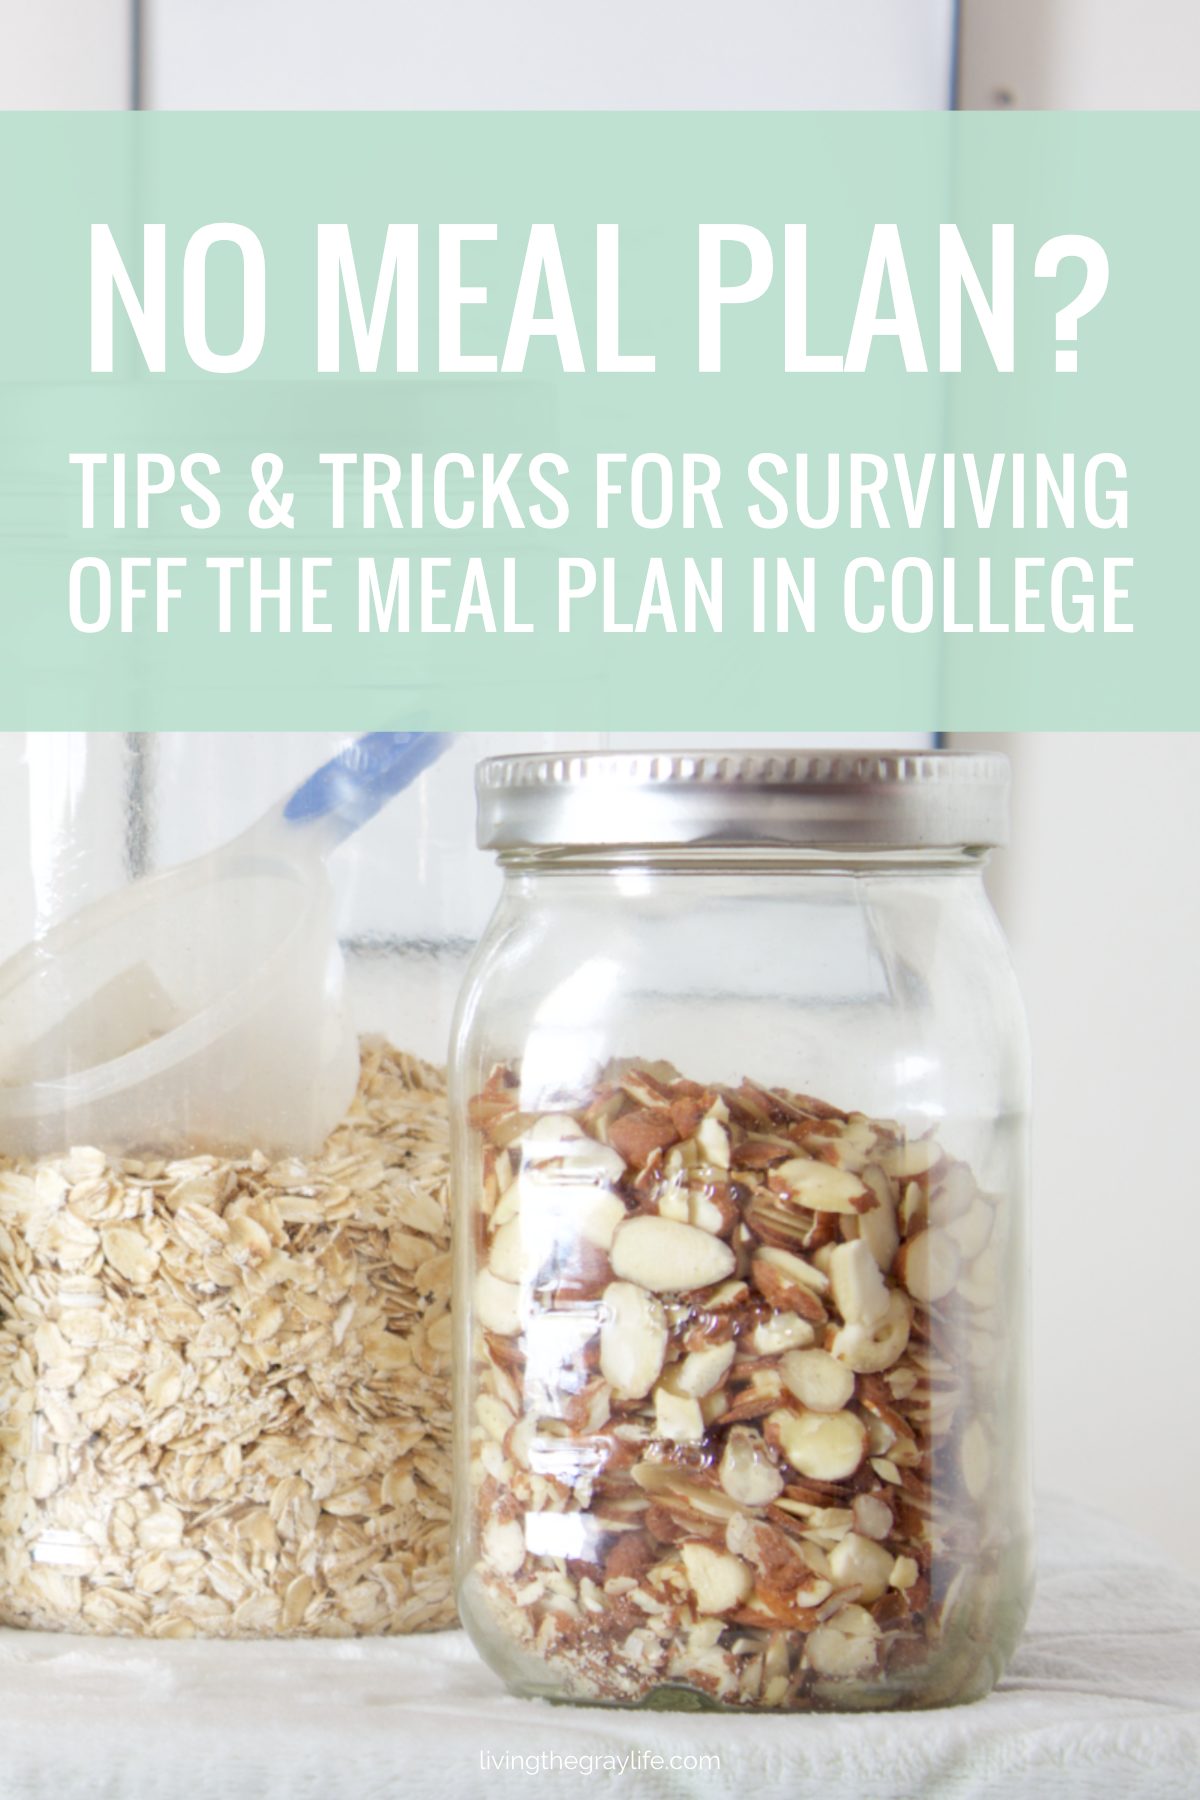 Are you finally off the college meal plan or you're just looking for ways to save money on groceries? Check out this post and see all the ways to survive off the meal plan in college!